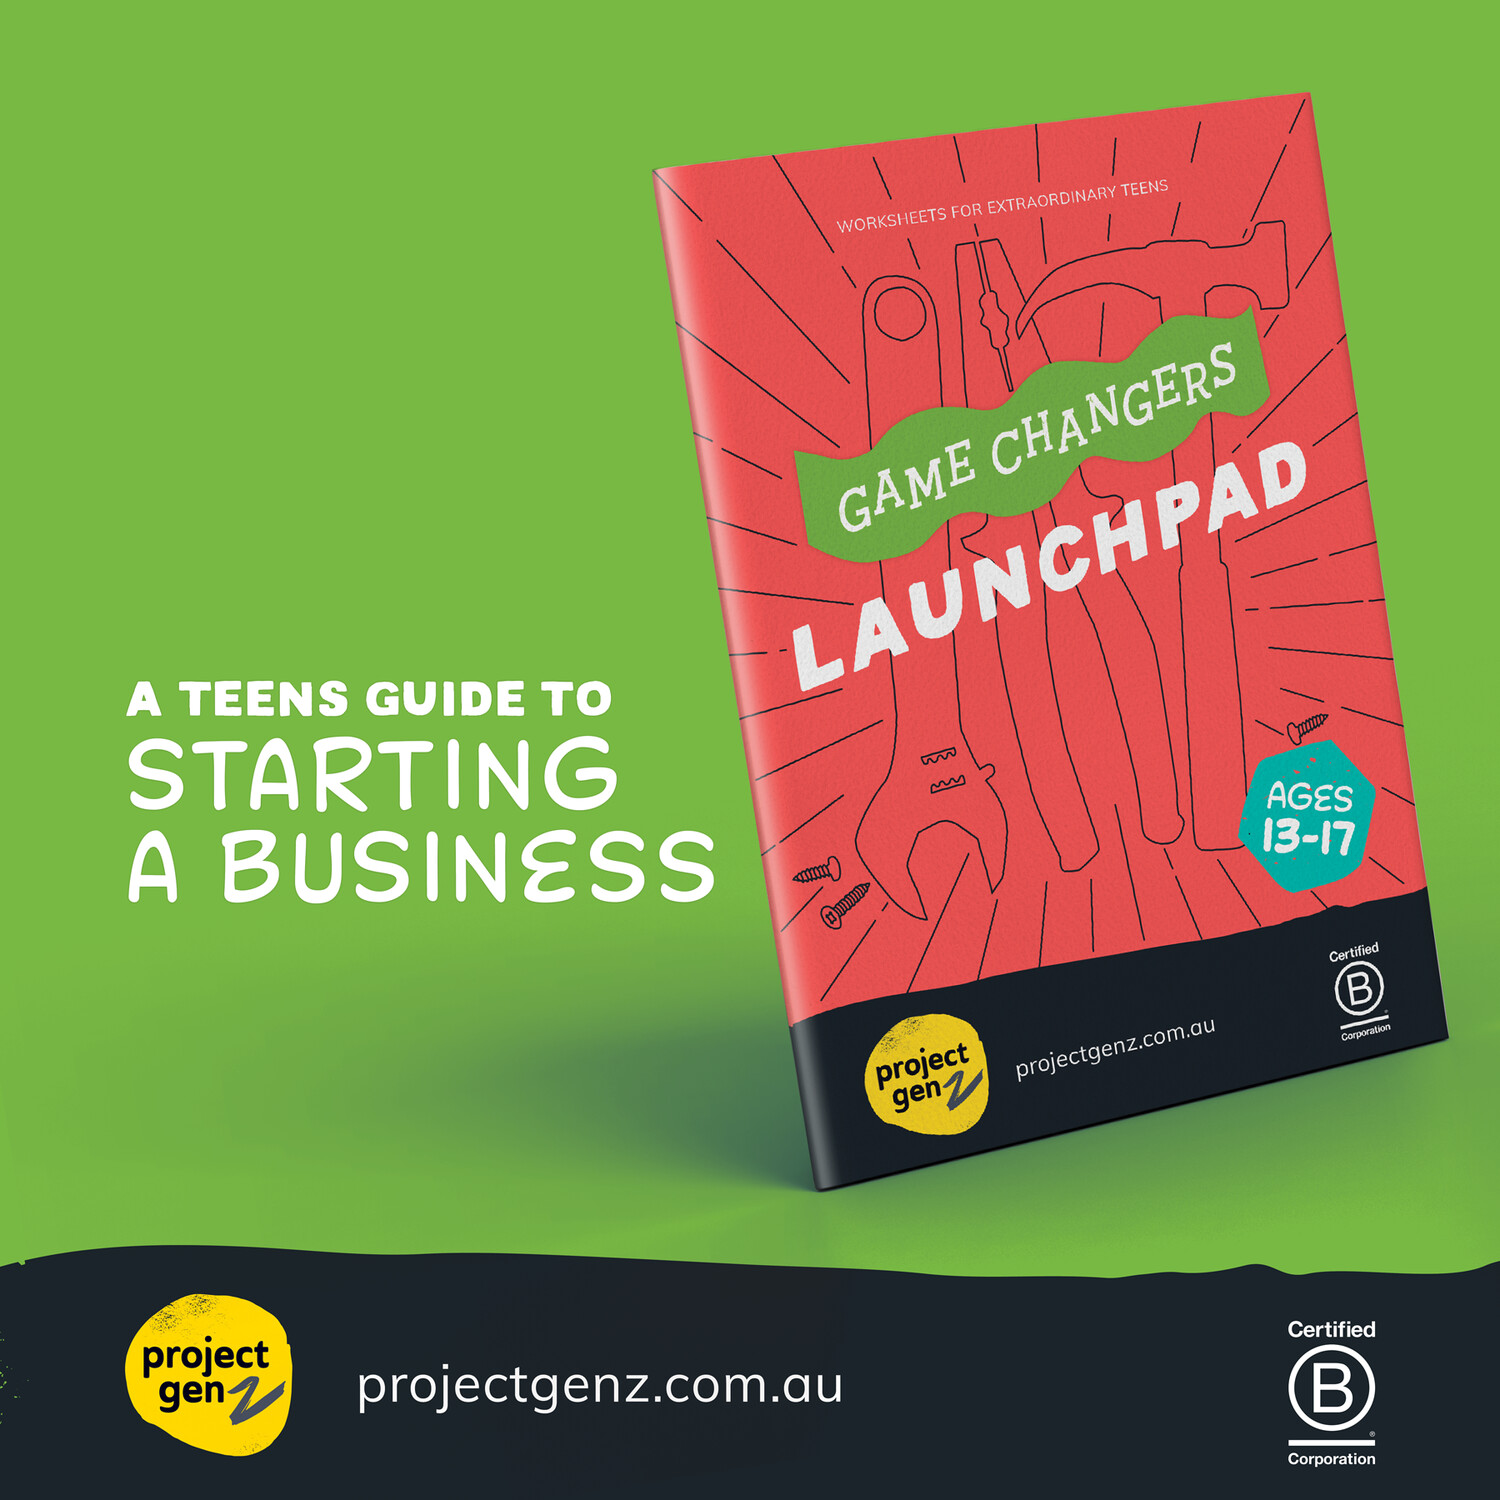 Launchpad- a teens online guide to starting a business
Age 12-17